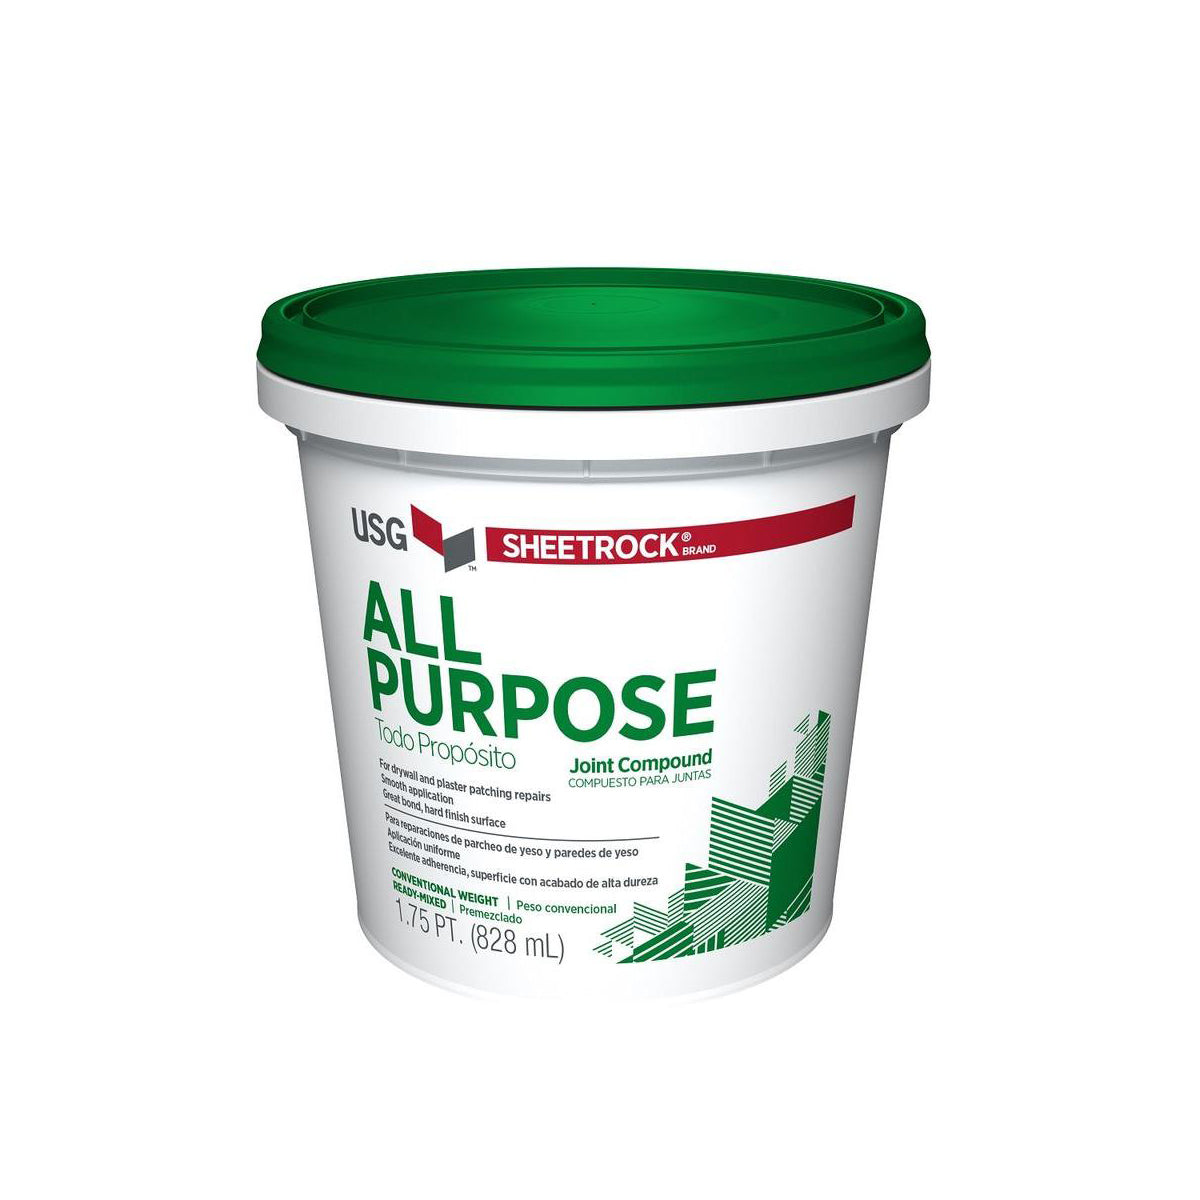 Sheetrock All-Purpose Joint Compound, available to shop online at Harris Colourcentres in Barbados.